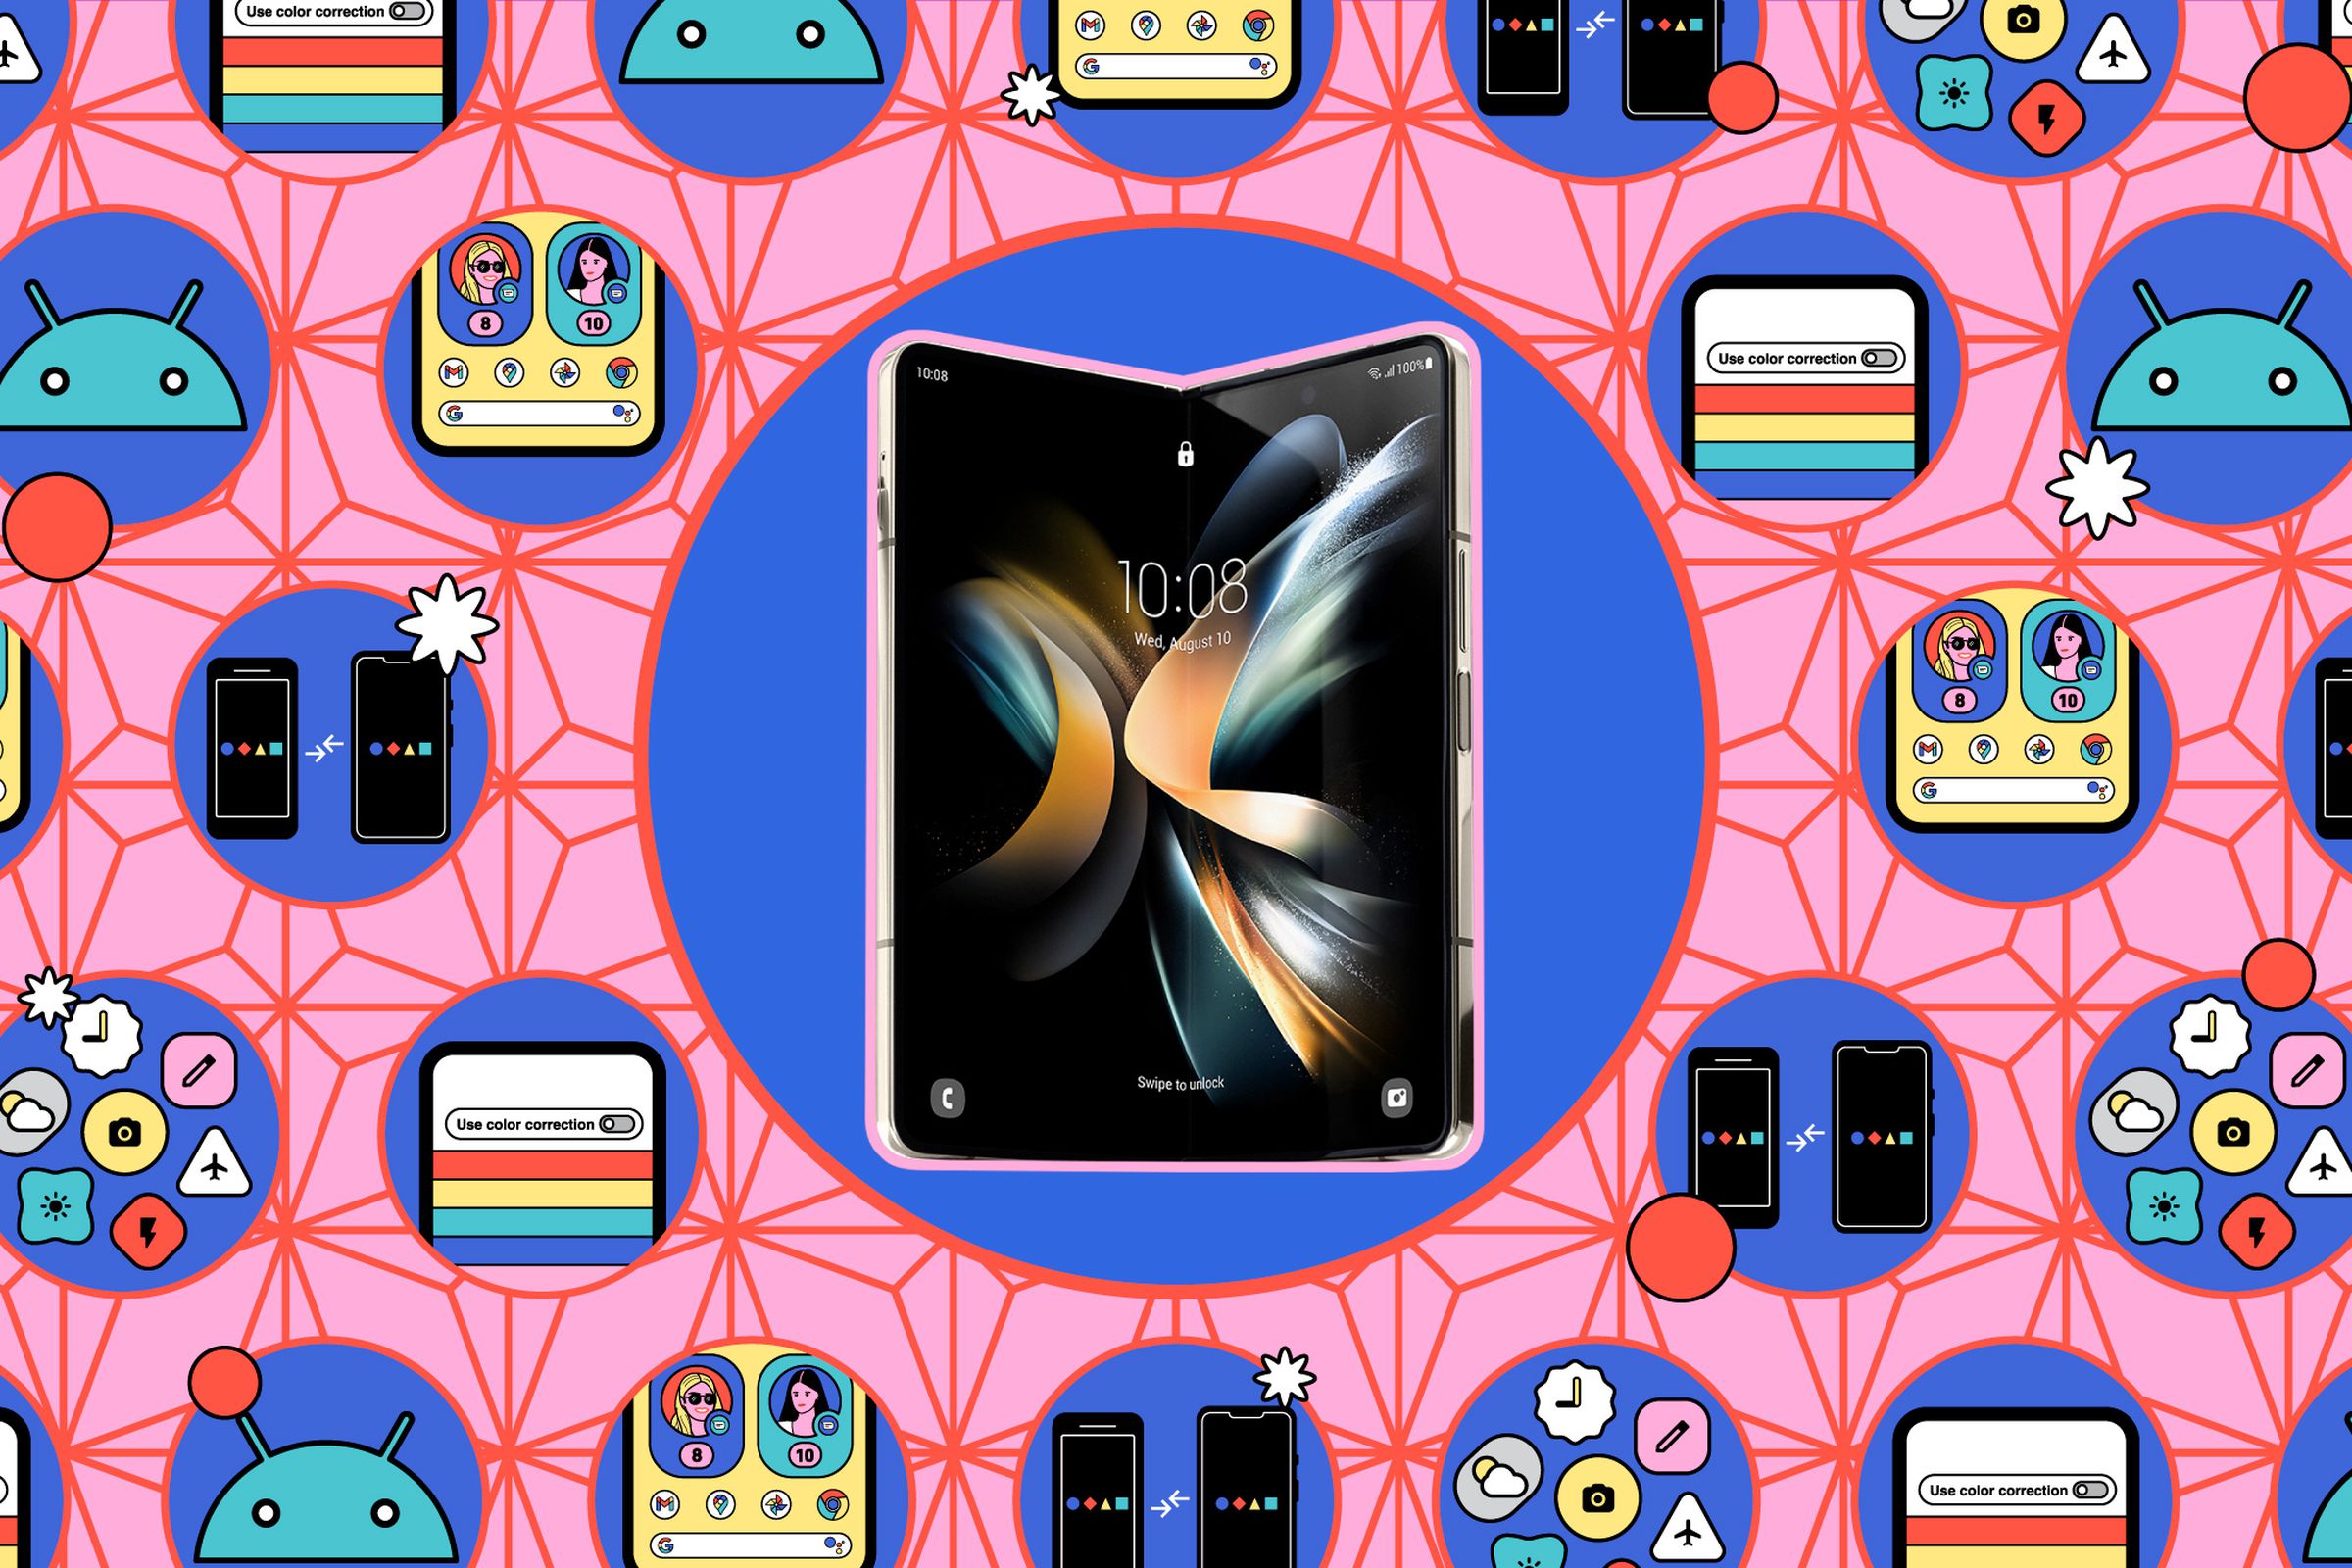 Samsung Galaxy Z Fold 3, Galaxy Z Flip 3 now official - Android Community